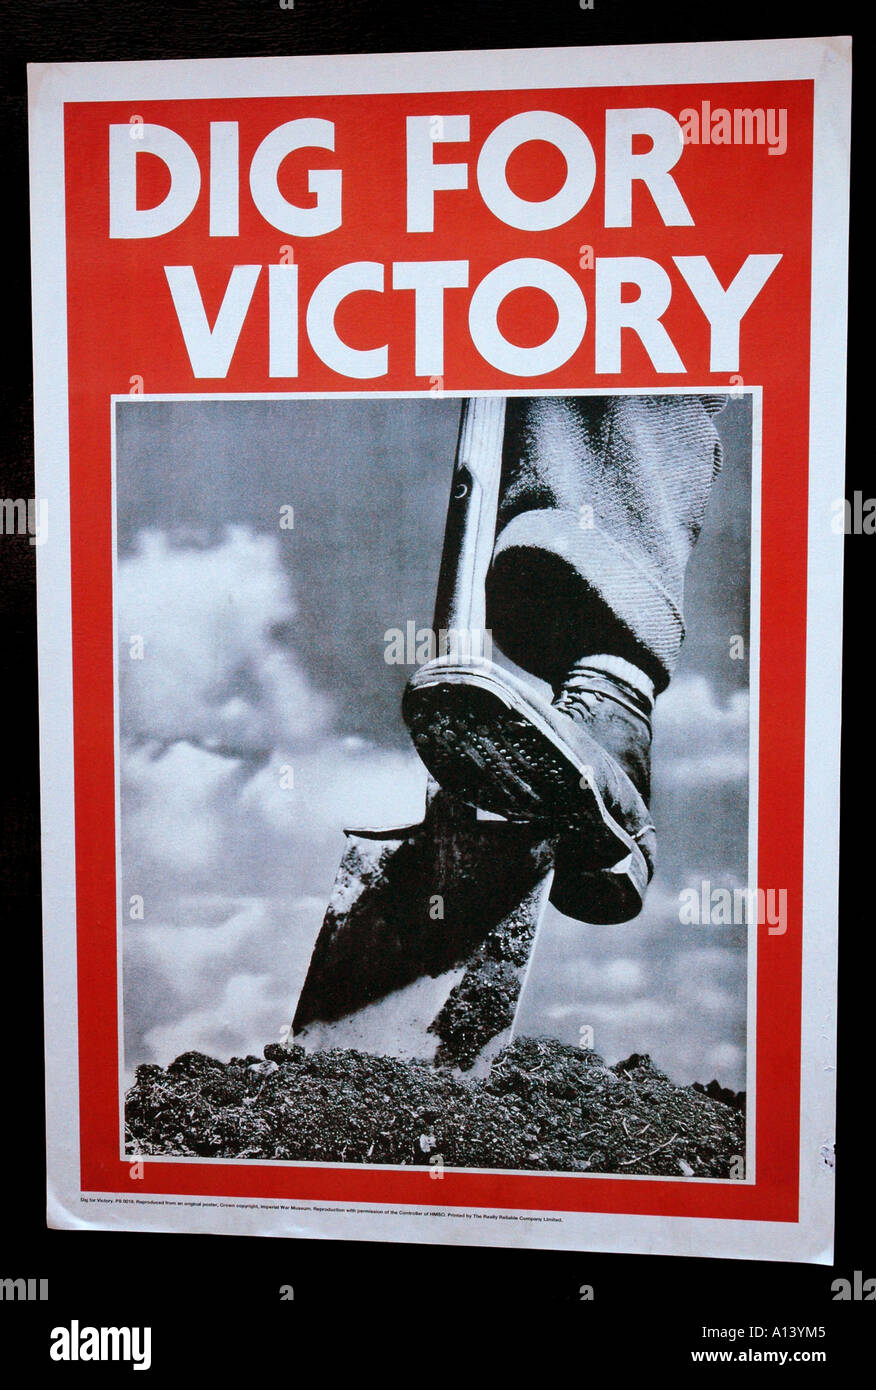 War poster (Dig for Victory) Stock Photo